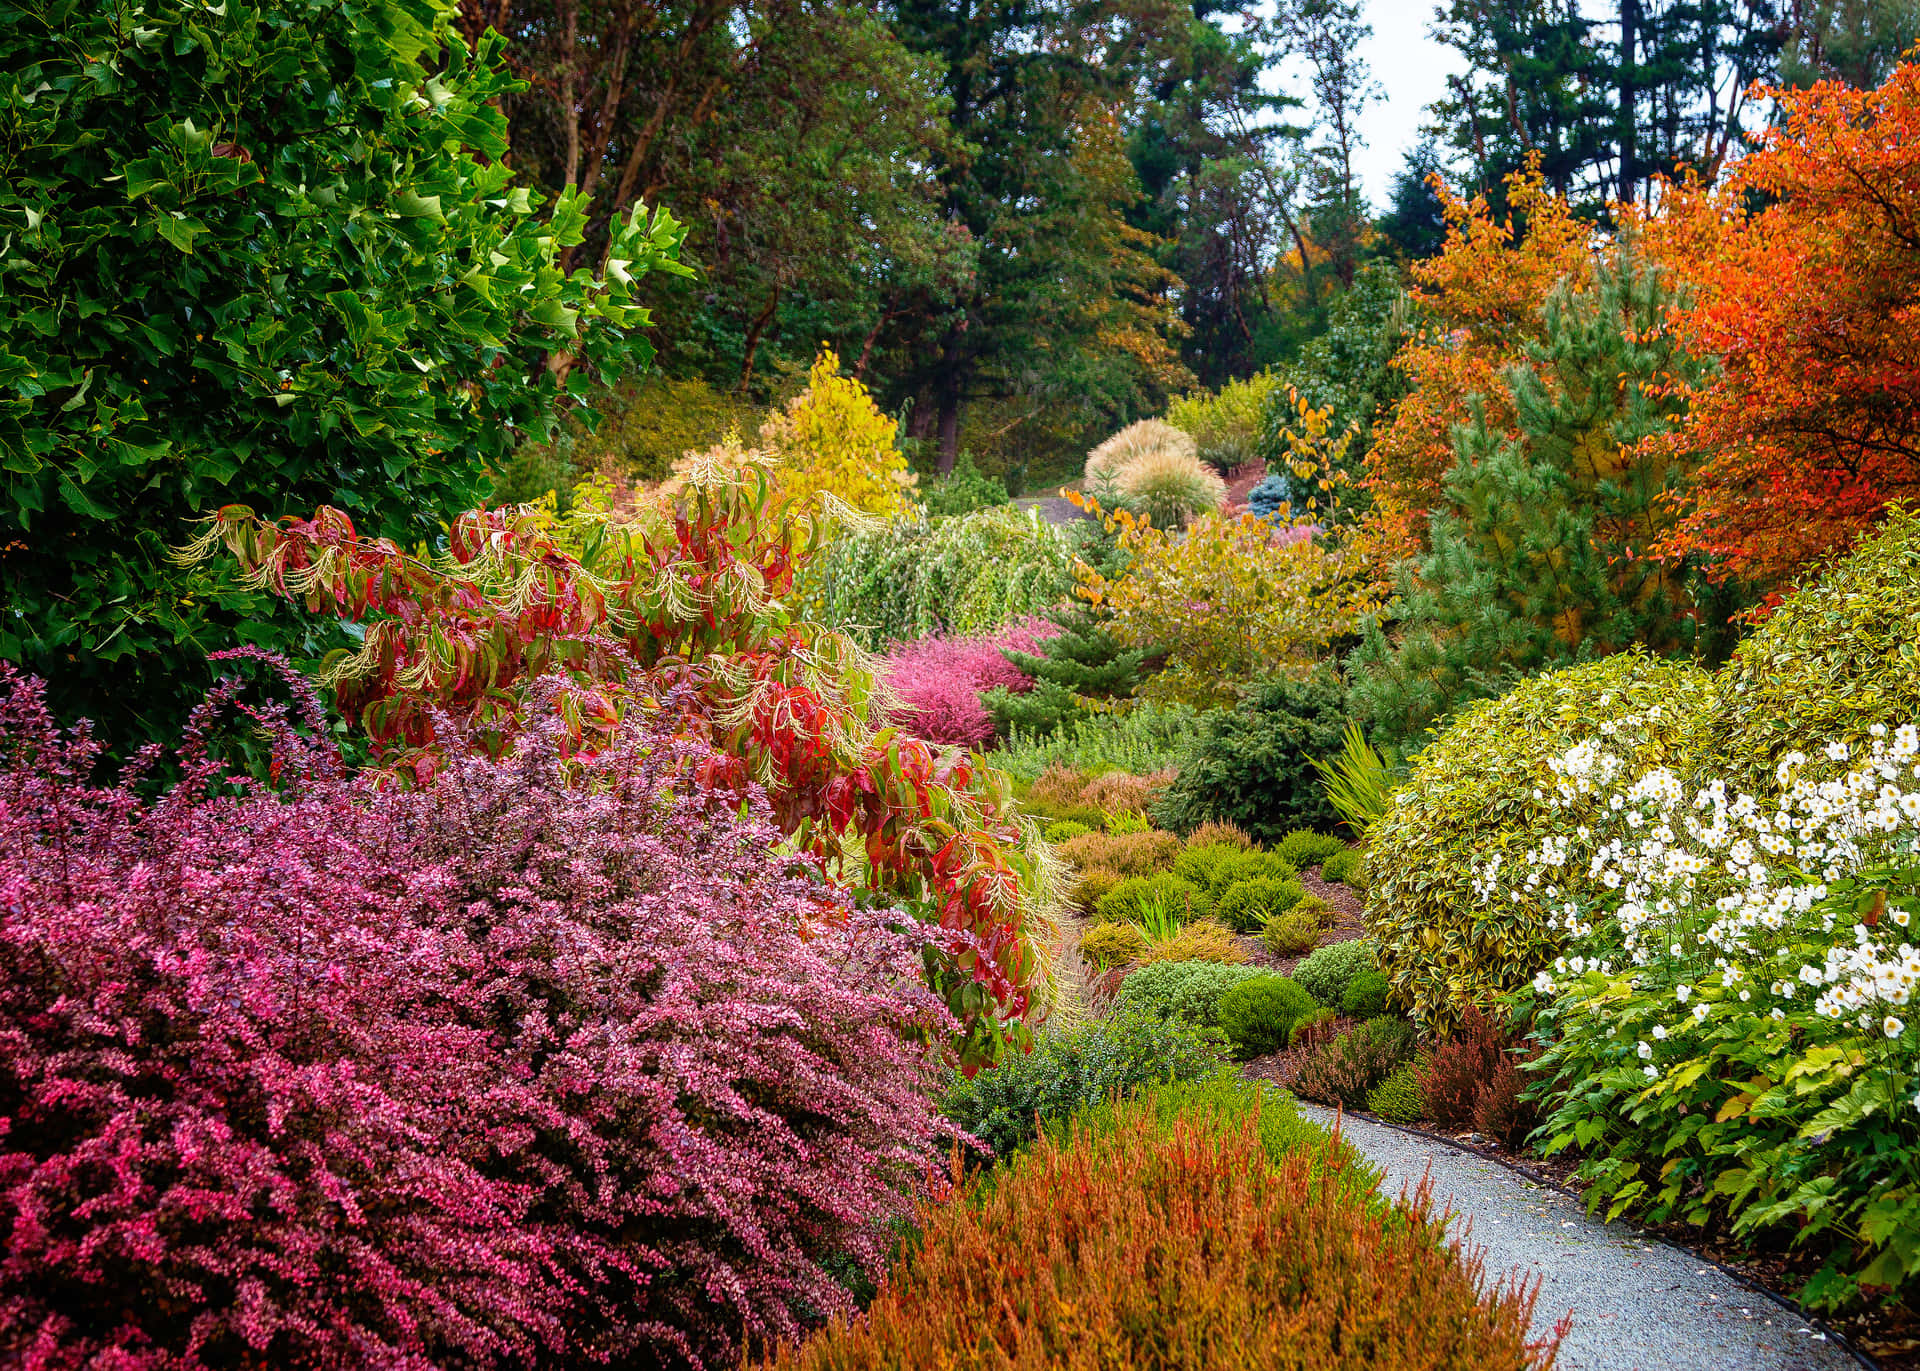 A Path With Colorful Shrubs And Trees